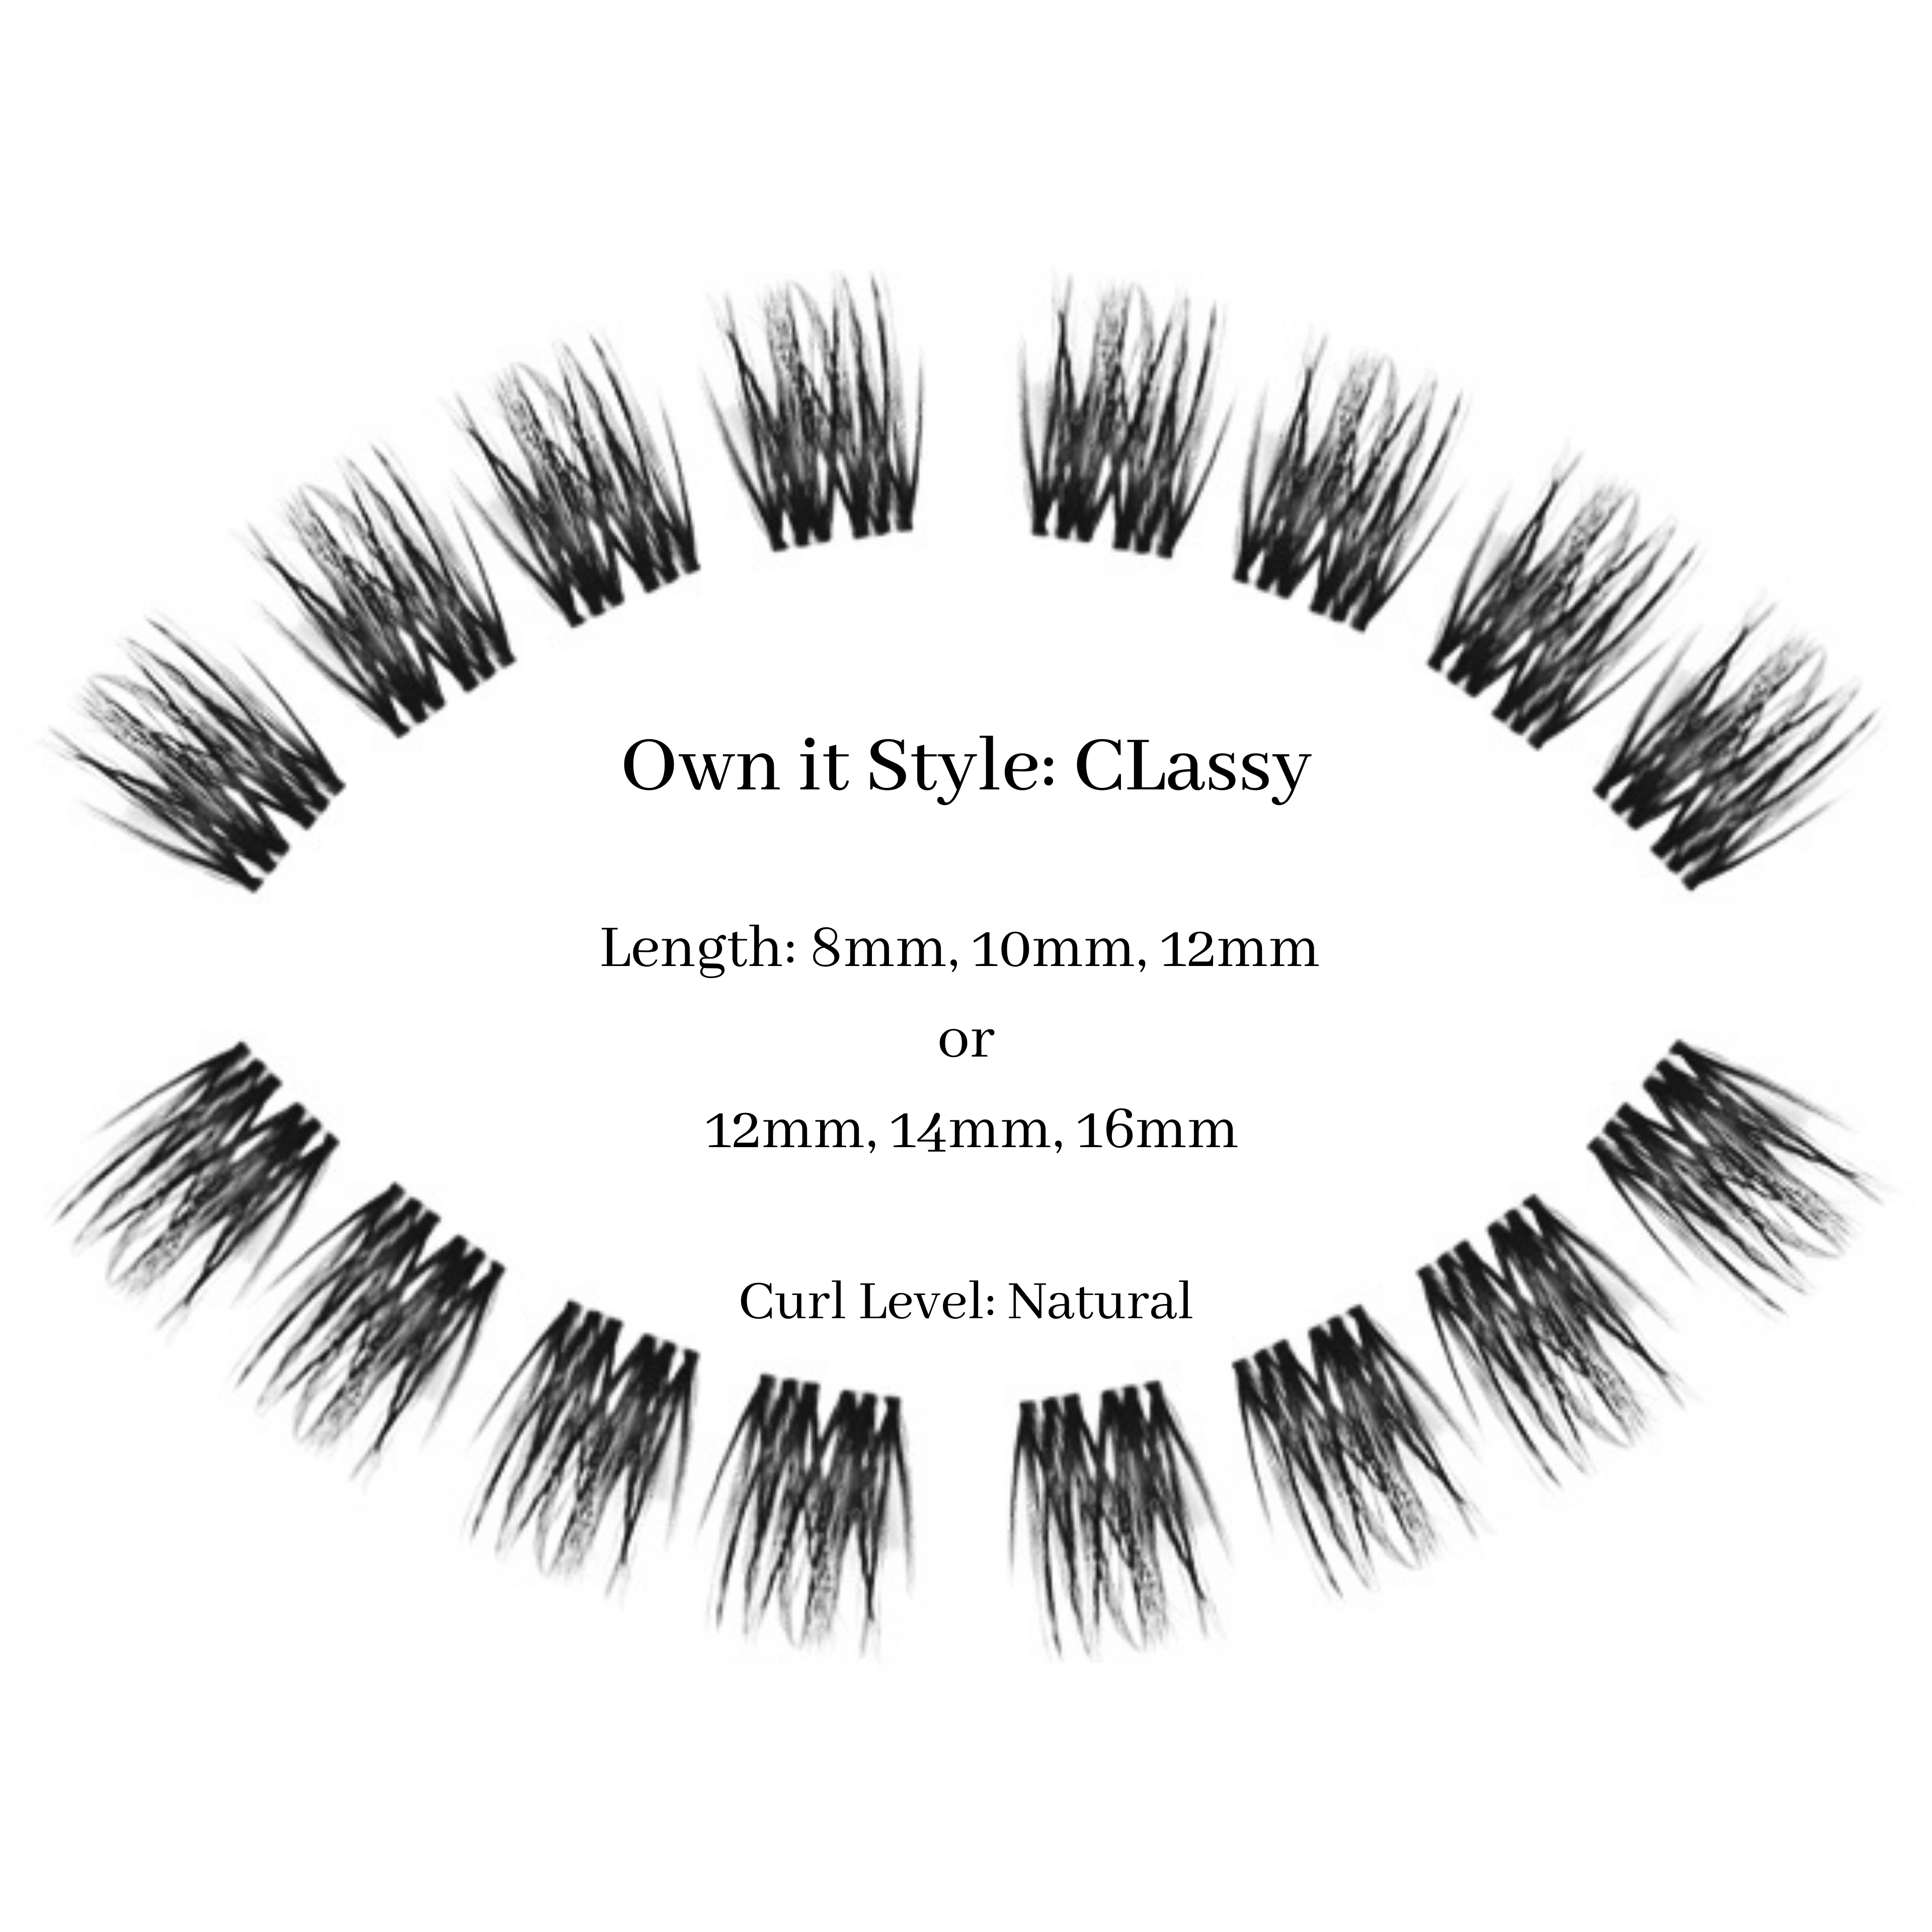 Own it Style: Classic- Curl type: Natural - E11 Store